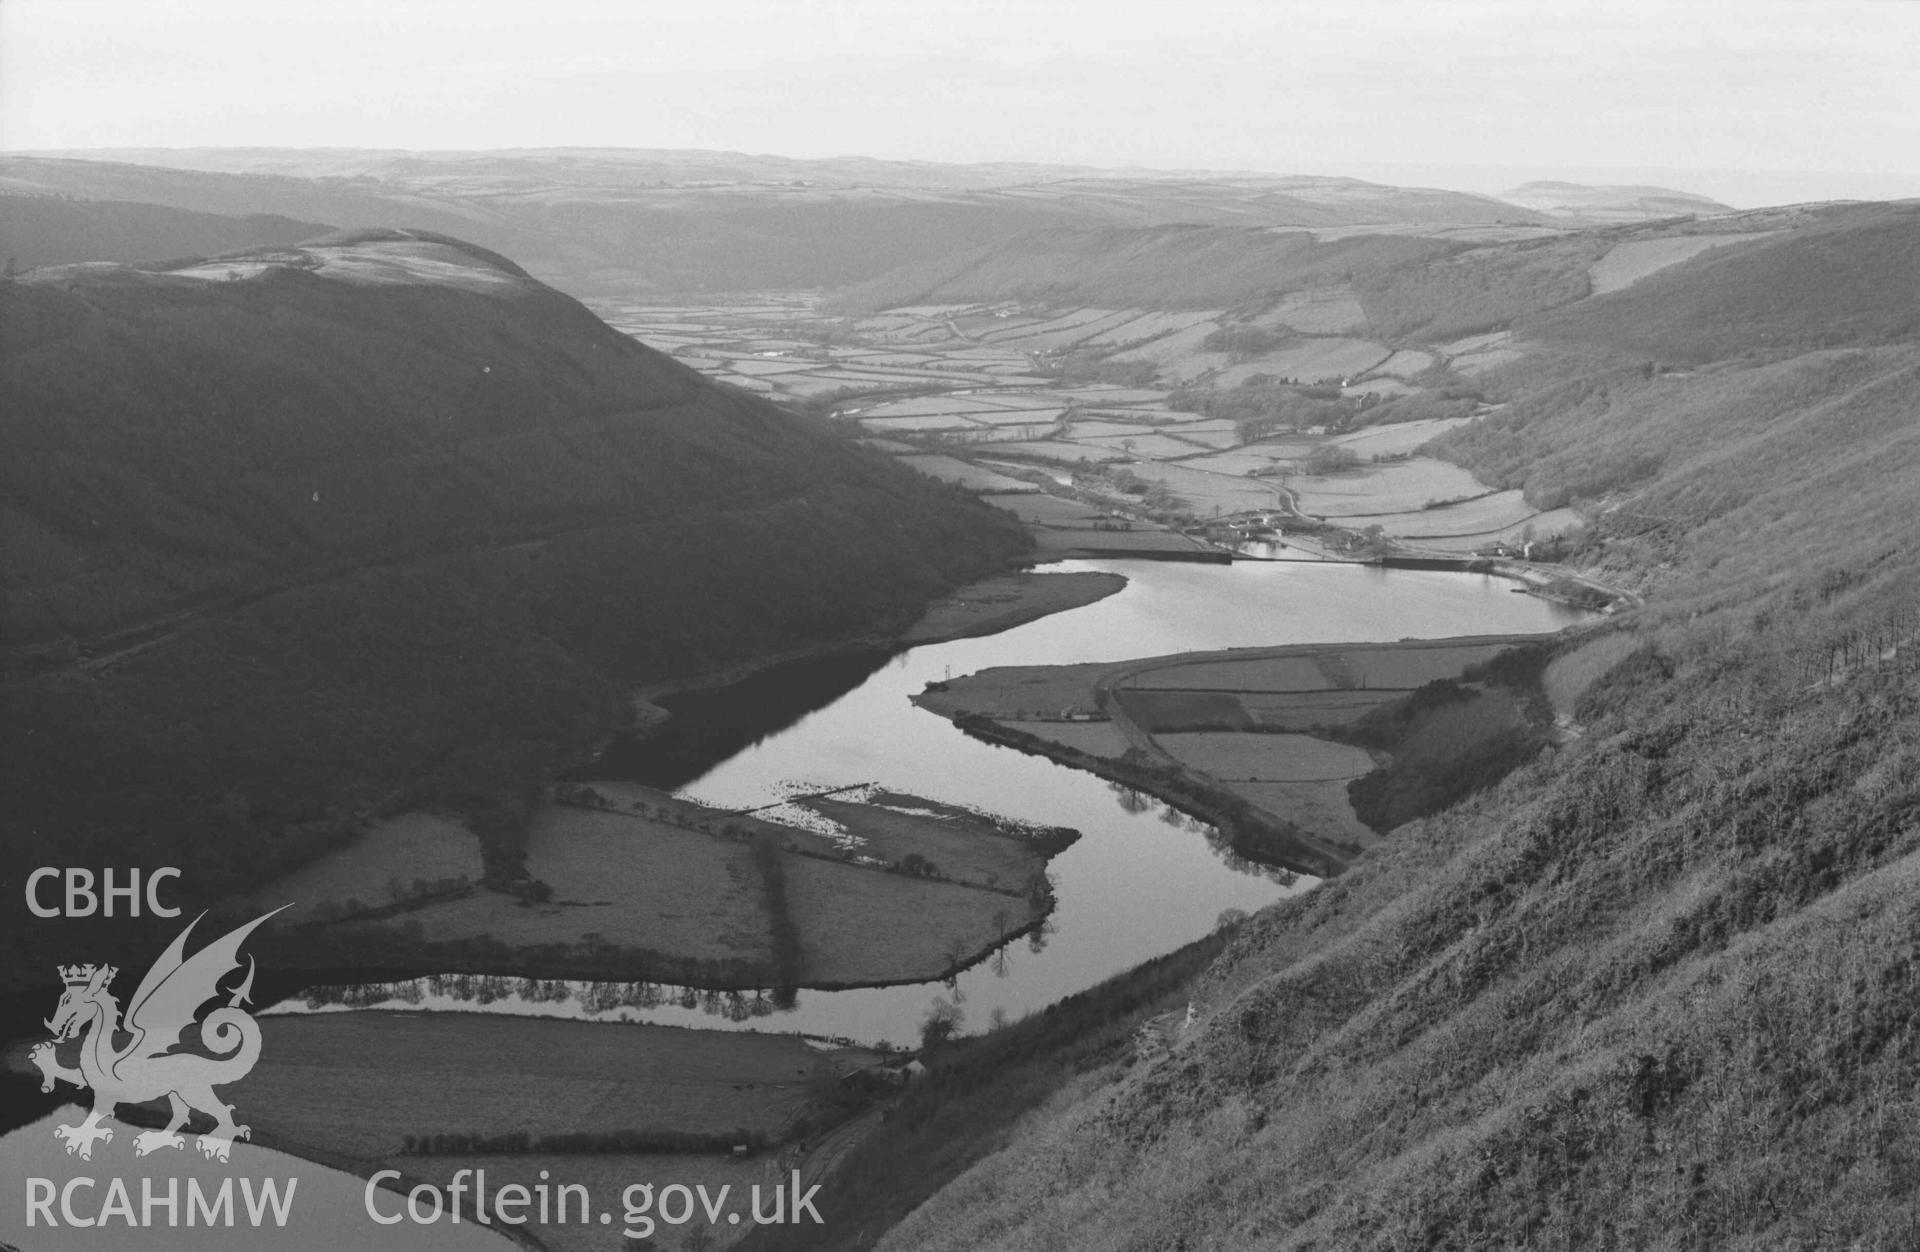 Digital copy of a black and white negative showing Rheidol valley and Pendinas from just west of Castell Bwa Drain. Photographed by Arthur Chater on 5 January 1969. Looking west from Grid Reference SN 7120 7950.